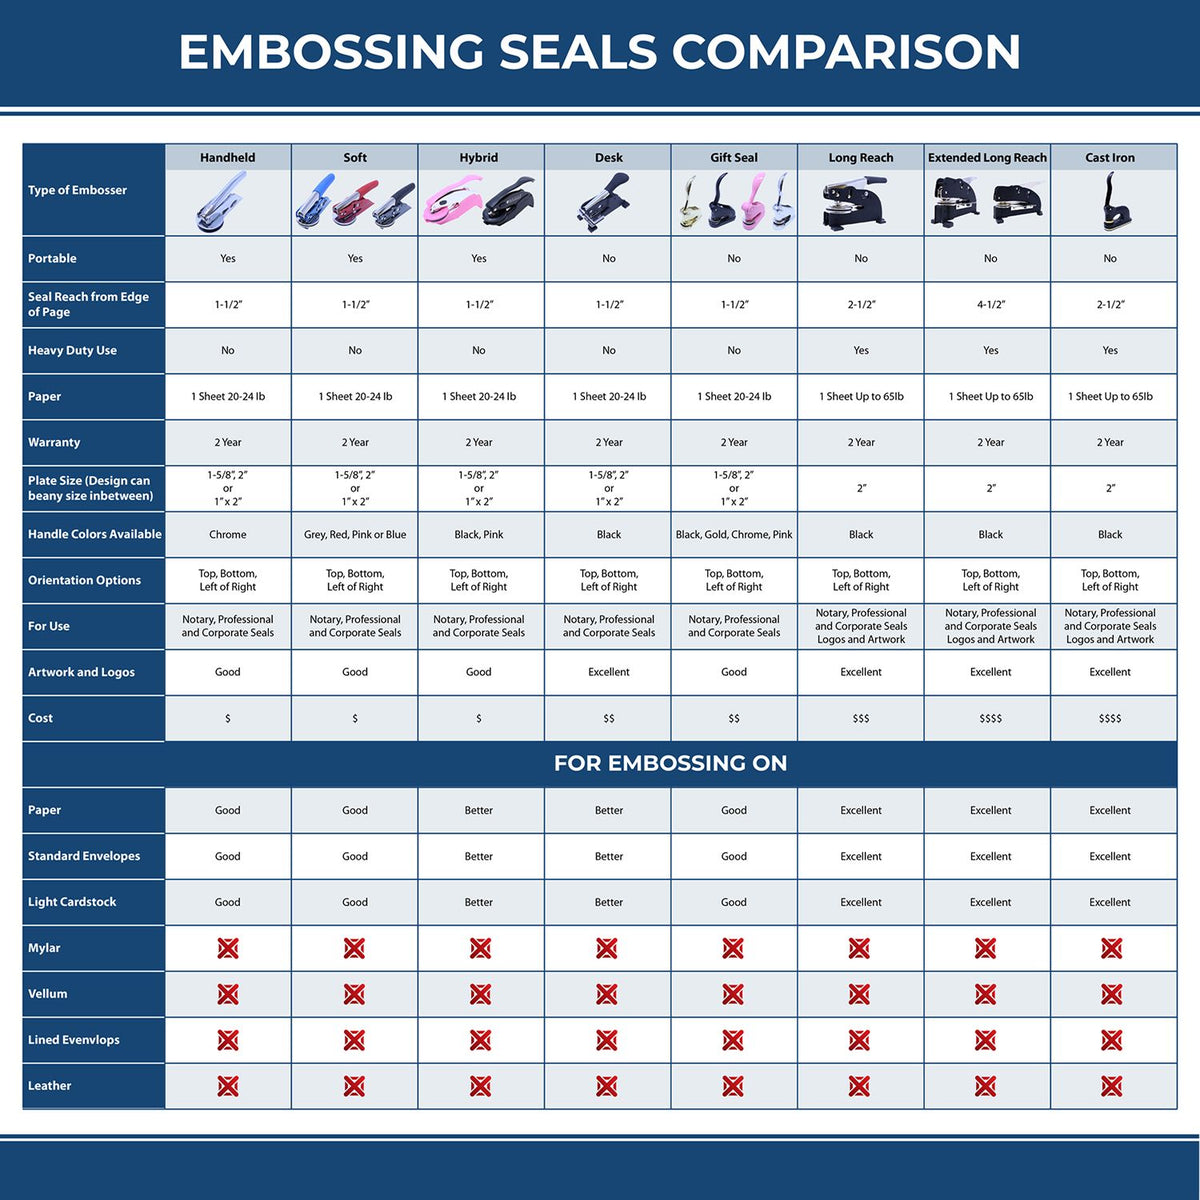 A comparison chart for the different types of mount models available for the Hybrid Mississippi Engineer Seal